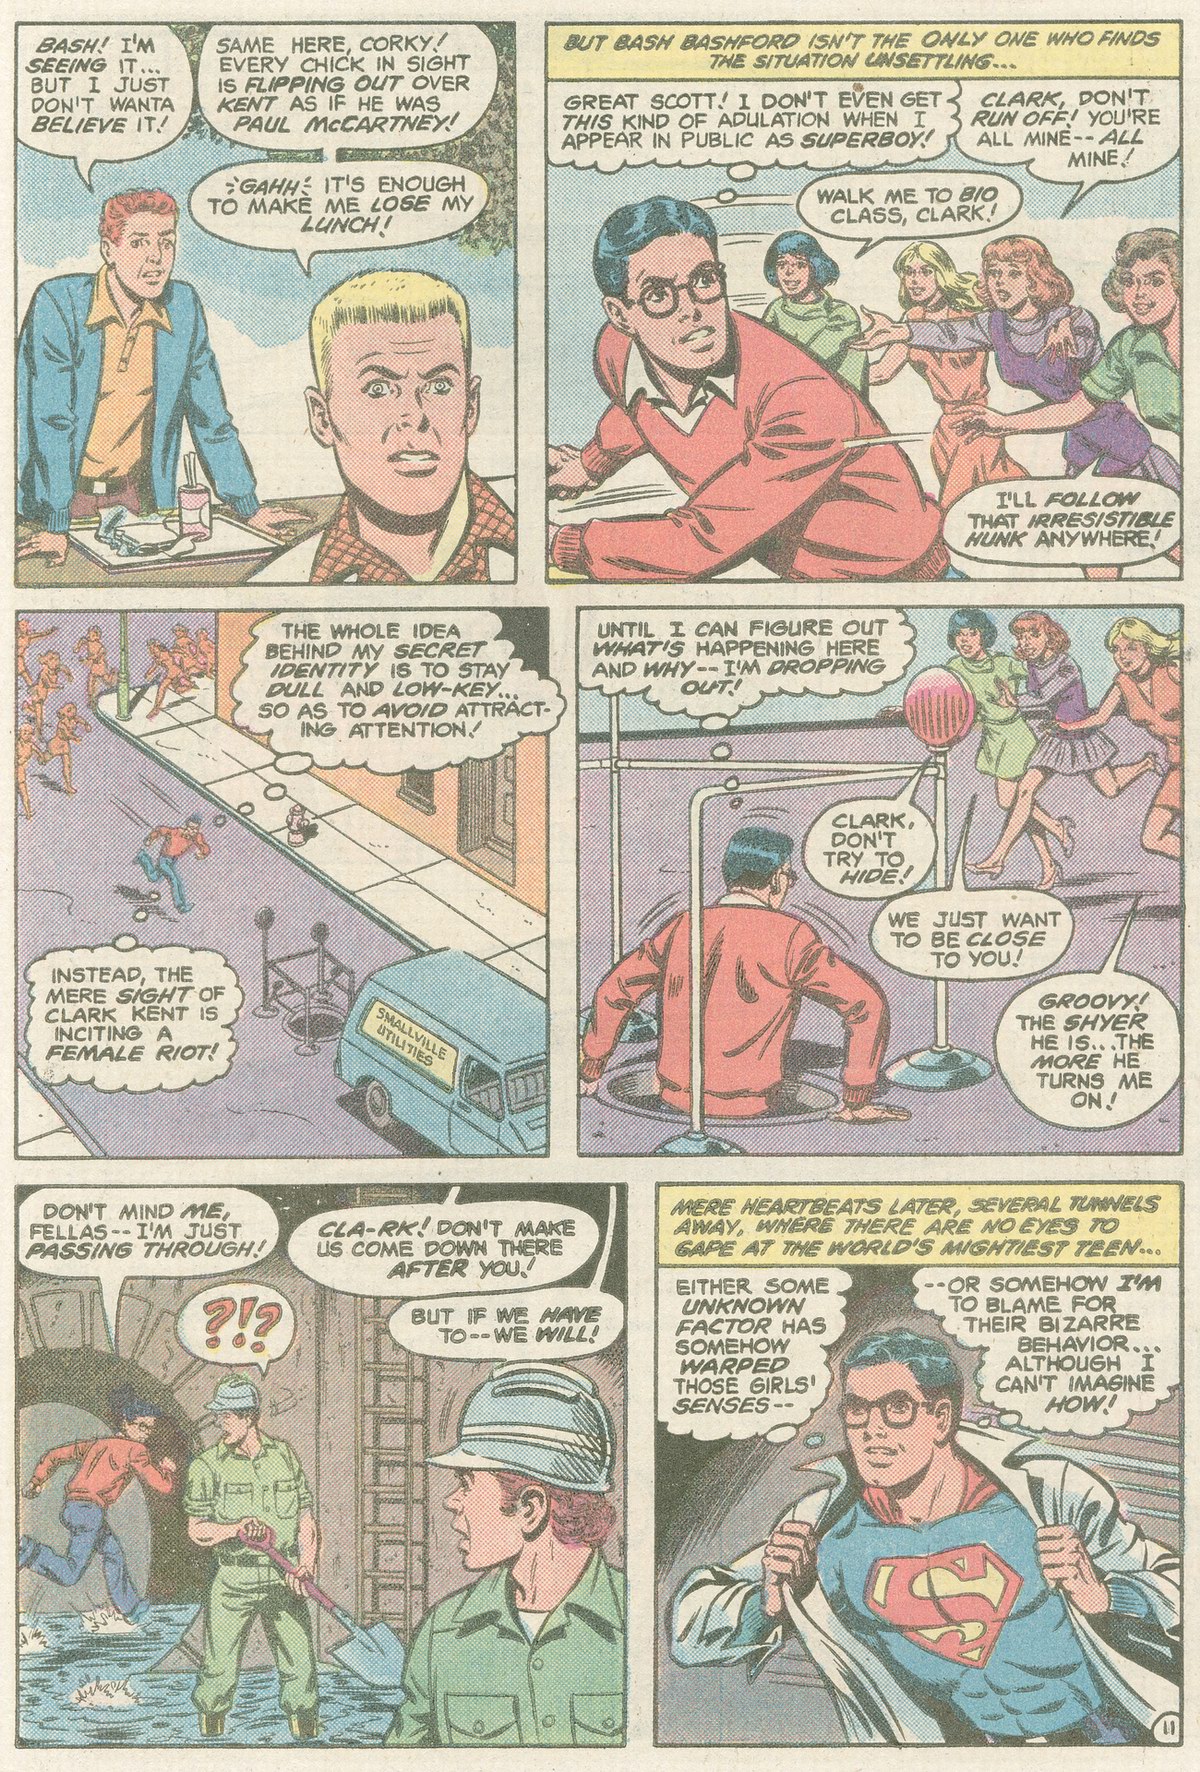 The New Adventures of Superboy 26 Page 11